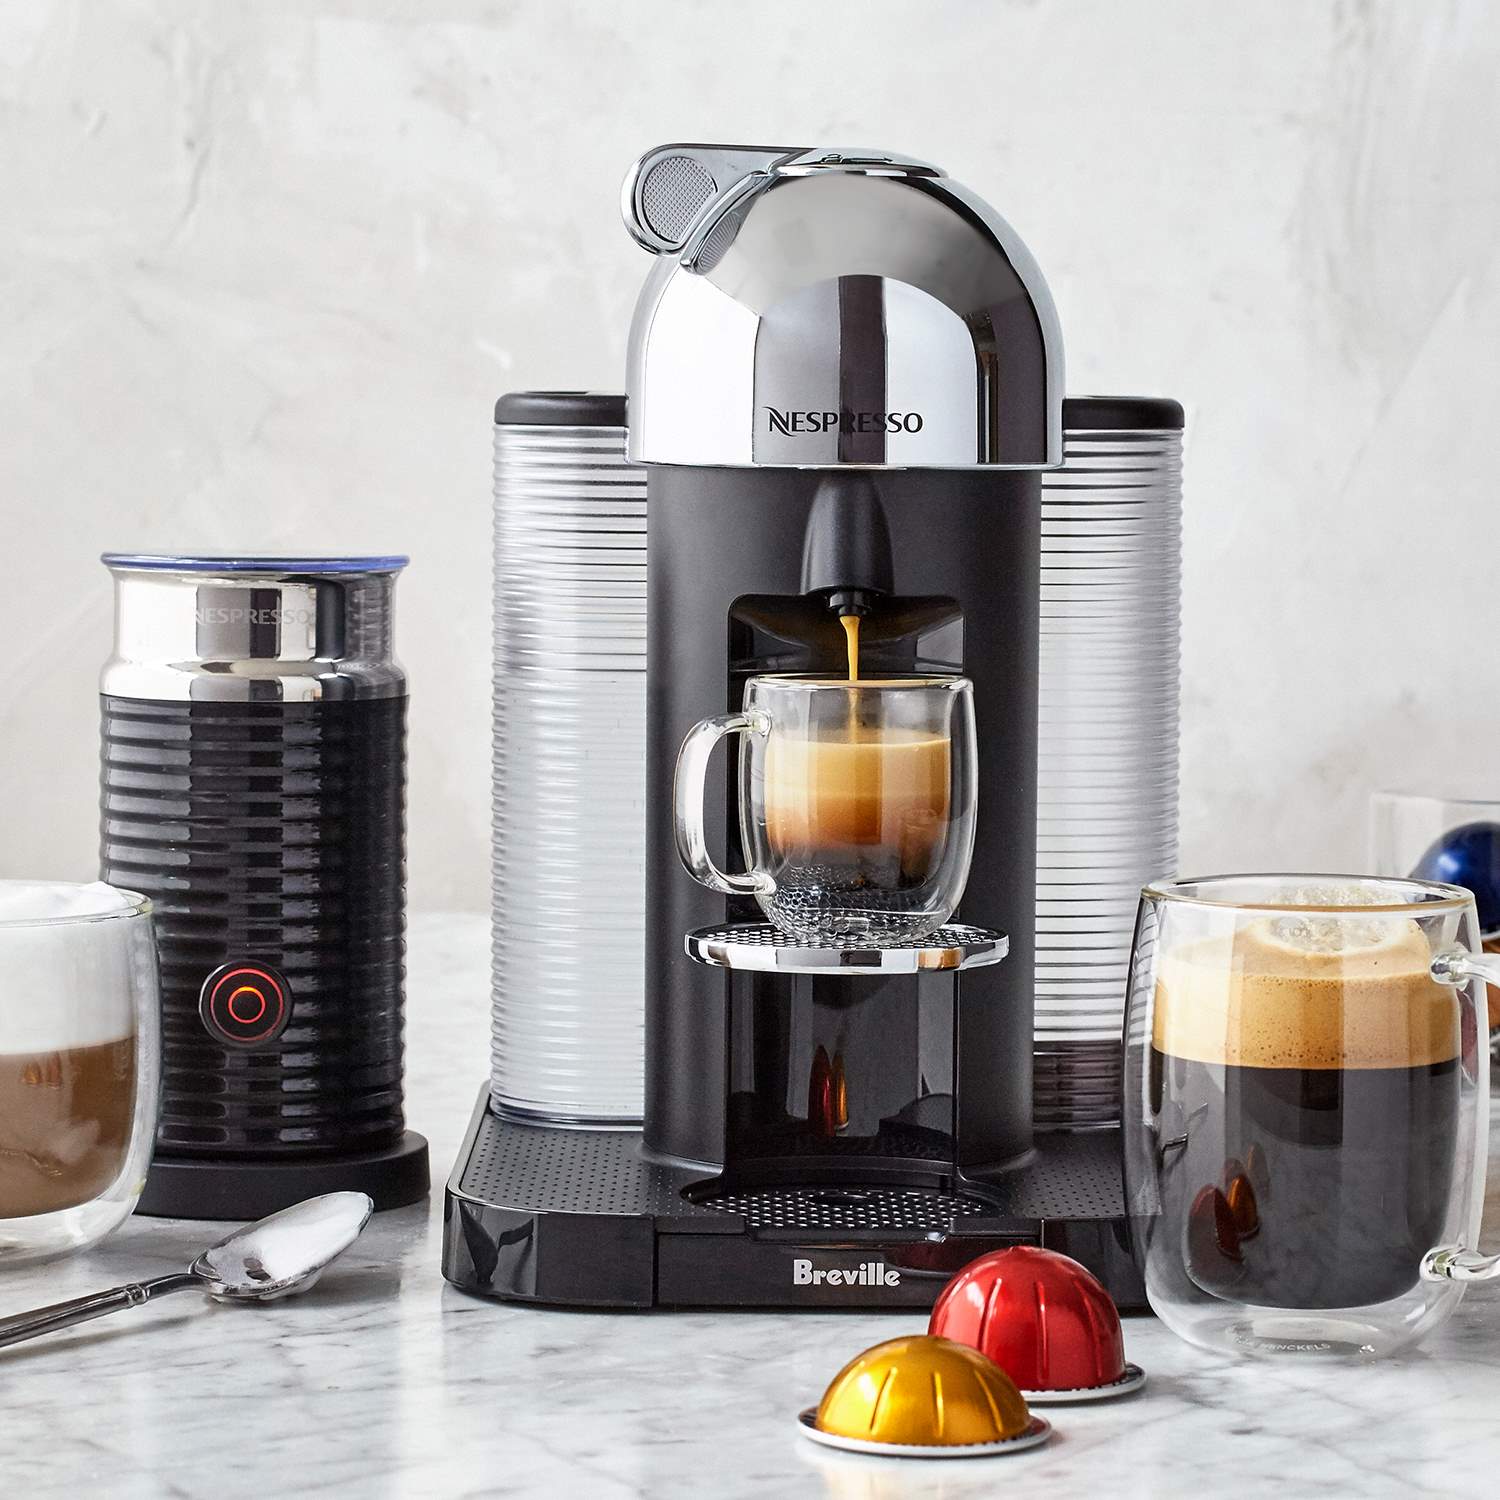 espresso machine buying guide, what to look for in an espresso machine, nespresso machine